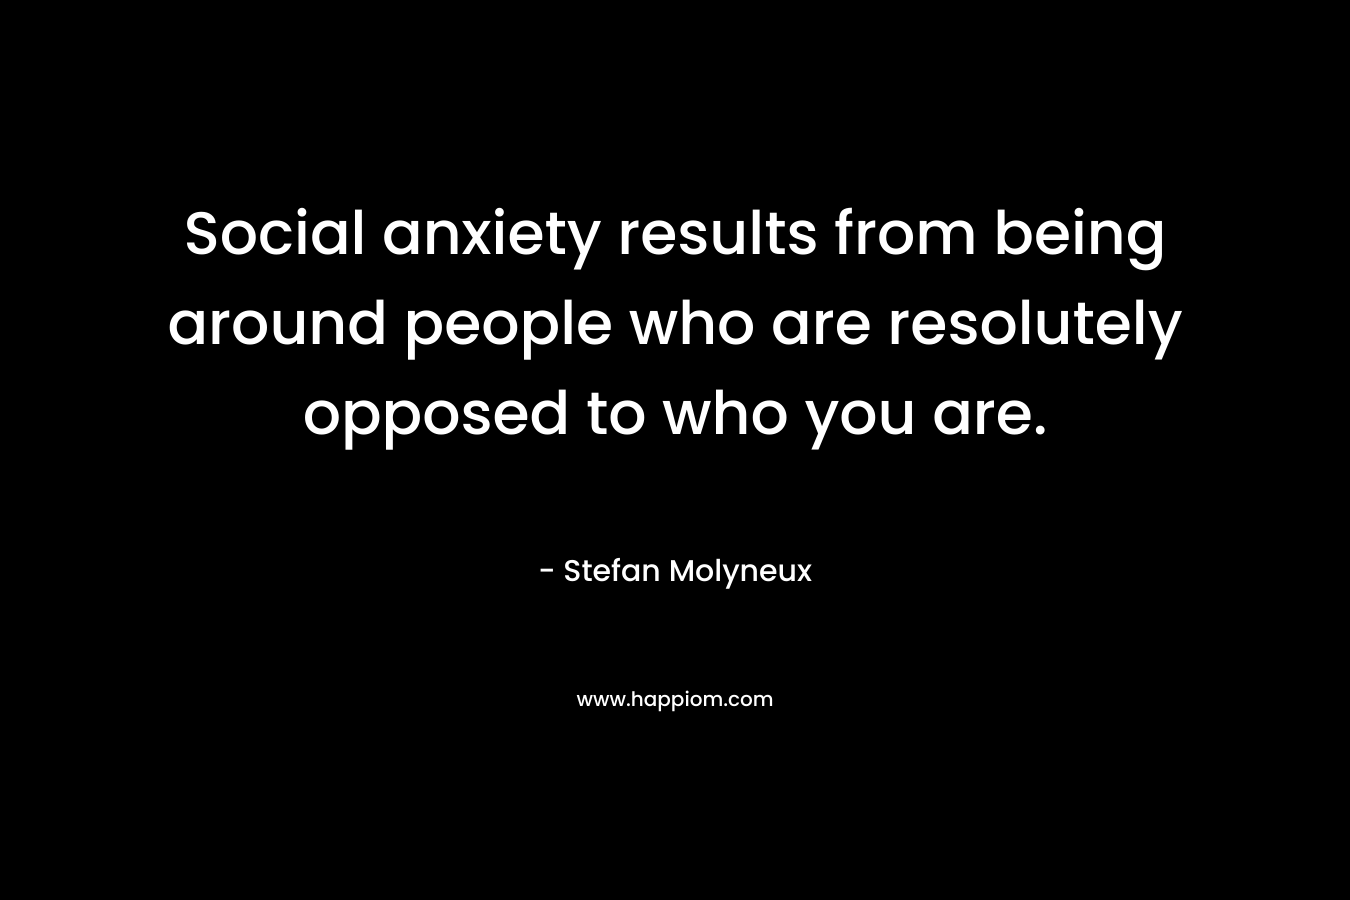 Social anxiety results from being around people who are resolutely opposed to who you are.